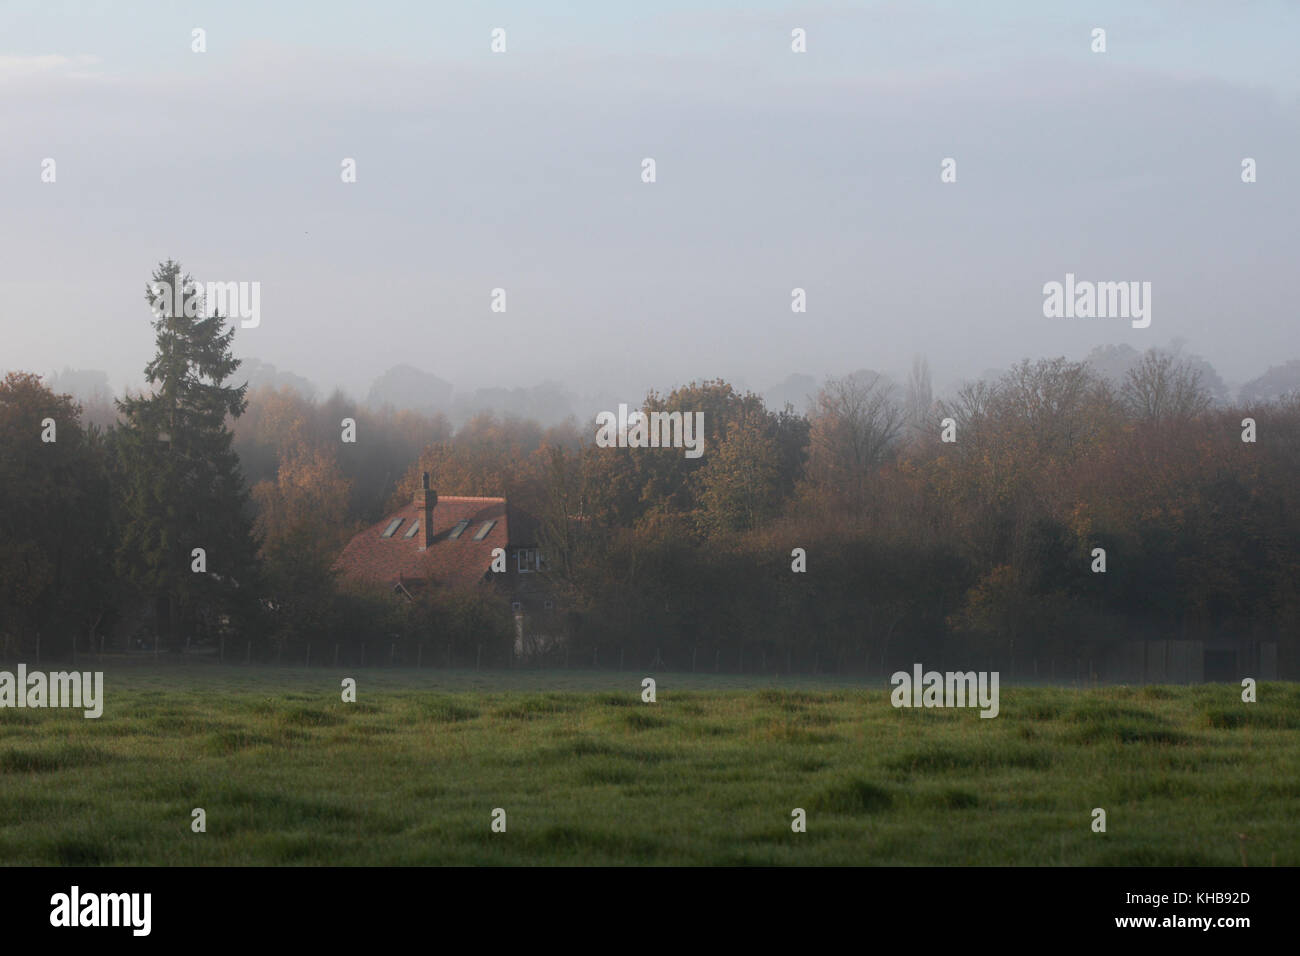 Ashford, Kent, UK. 15th Nov, 2017. Foggy in rural Kent this morning. This small village near Ashford is surrounded by beautiful forest and home to Hamstreet Woods National Nature Reserve. Photo Credit: Paul Lawrenson/Alamy Live News Stock Photo